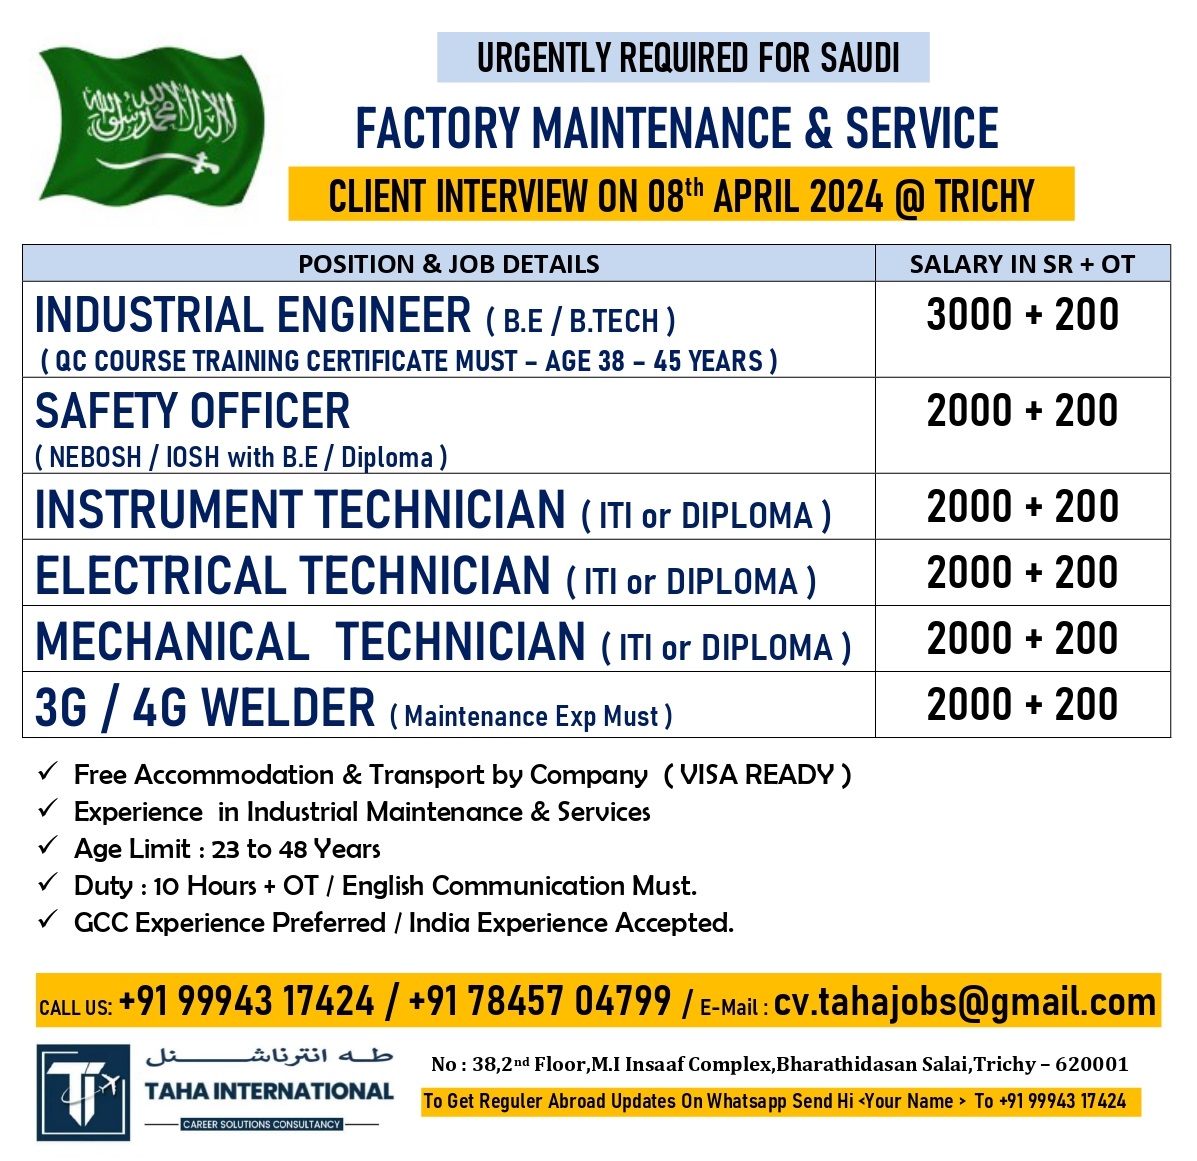 URGENTLY REQ FOR SAUDI – FACTORY MAINTENANCE & SERVICE – INTERVIEW ON 8TH APRIL 2024 @ TRICHY